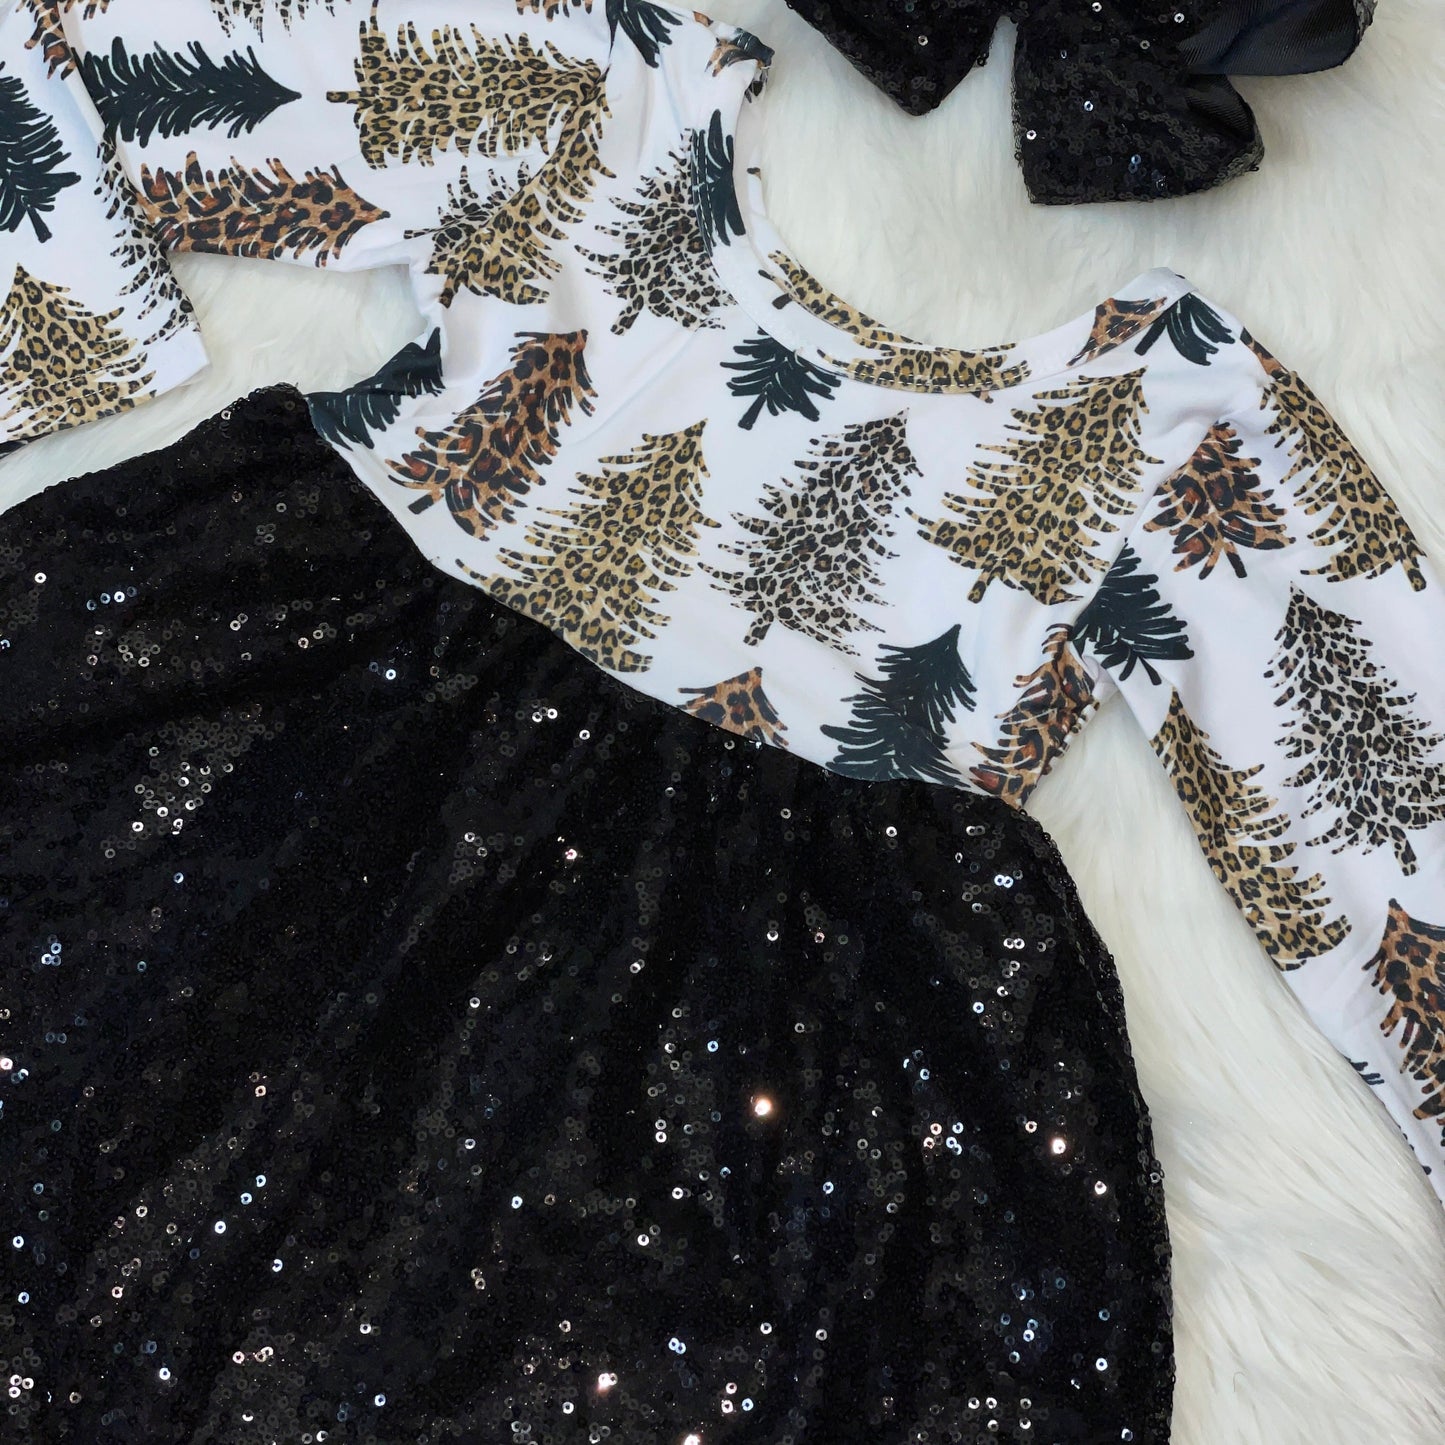 Black Sequin Holiday Dress with Leopard Tree Print Bodice